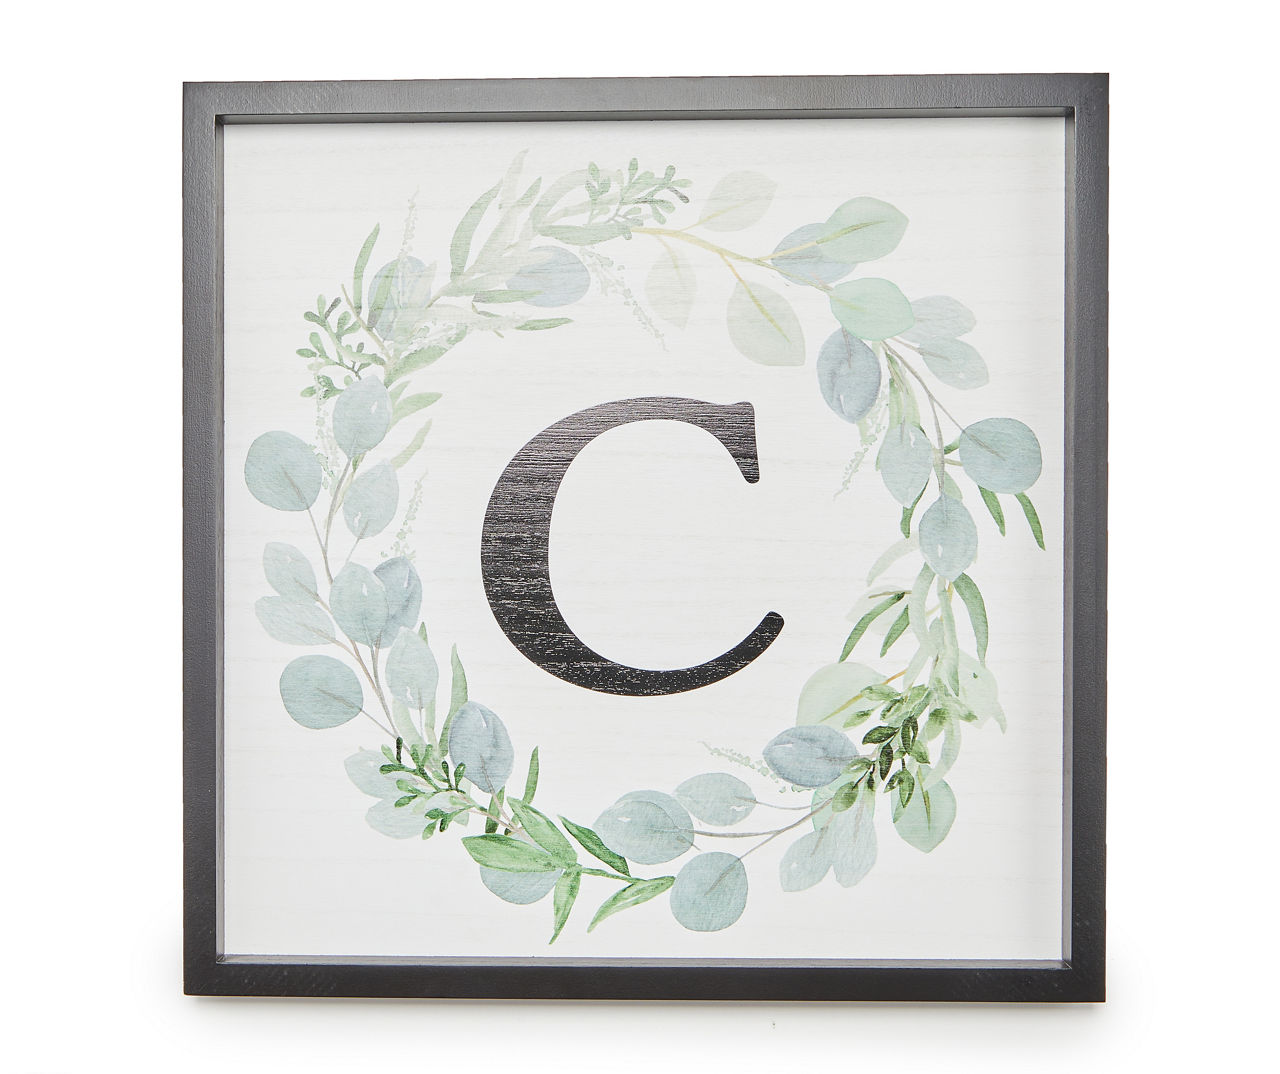 "C" White, Green & Black Wreath Initial Framed Wall Plaque